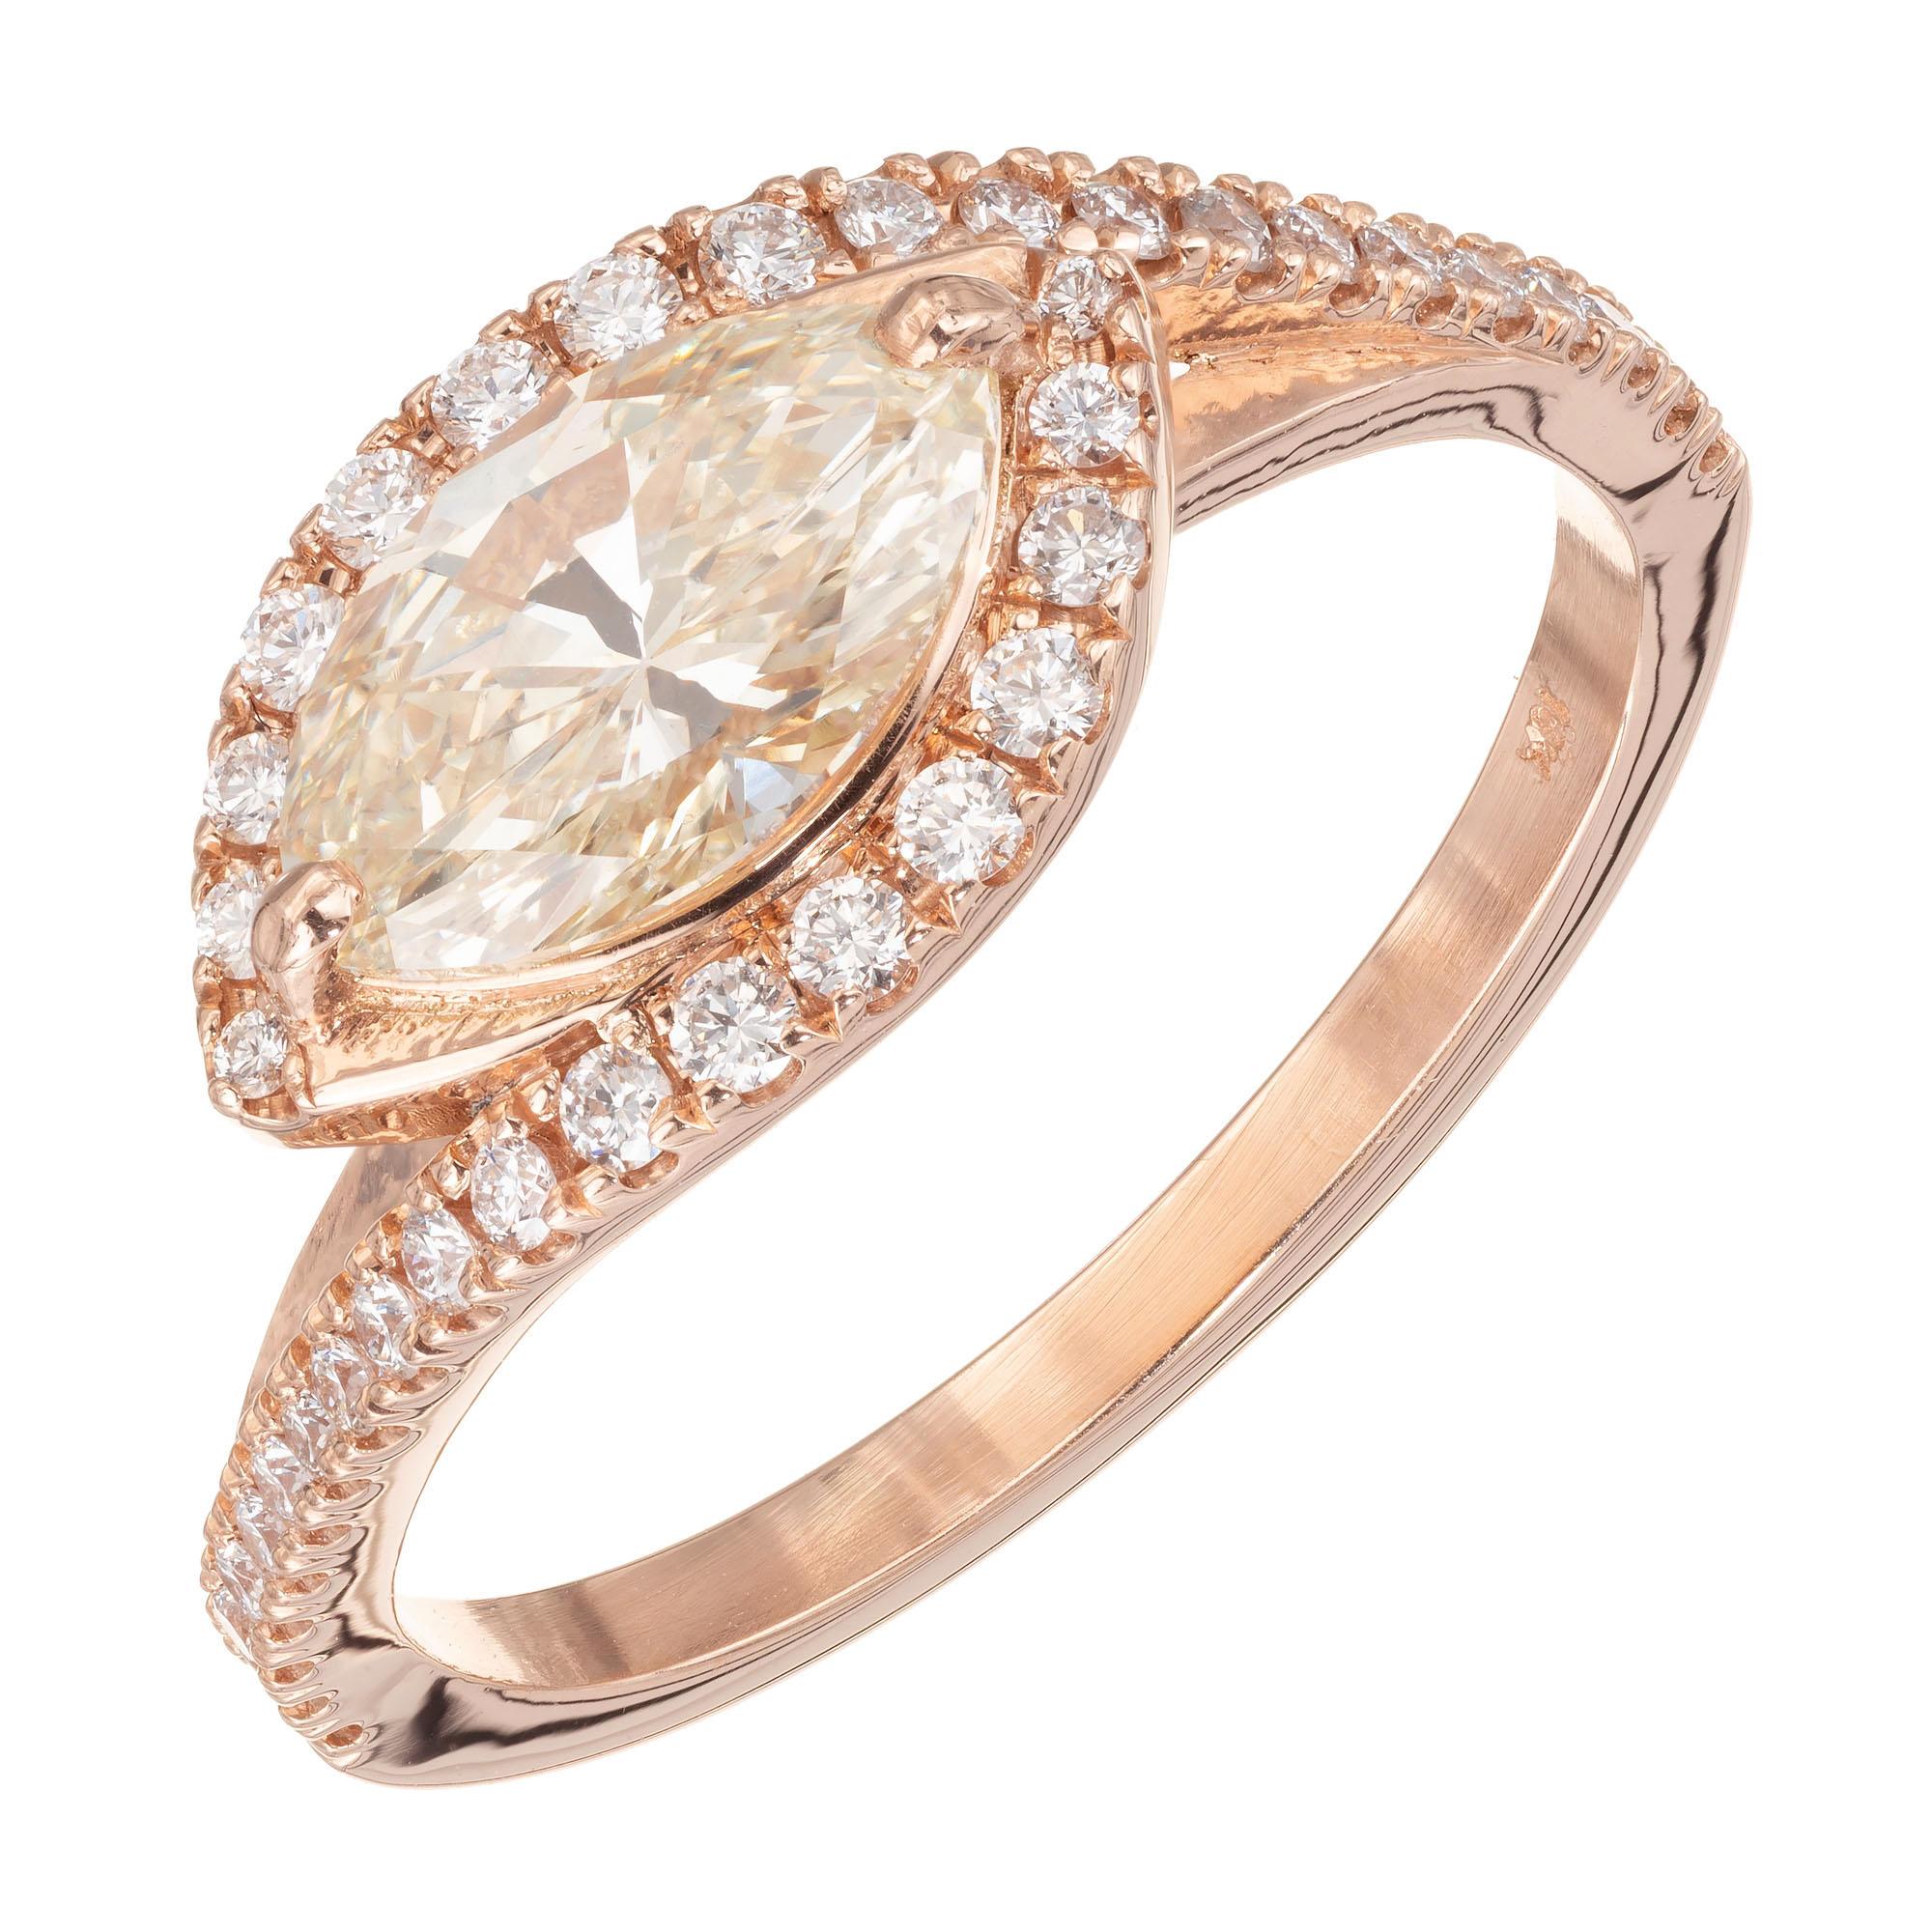 Marquis diamond halo engagement ring.  circa 1950 GIA certified soft warm yellow center stone in a 18k rose gold Swirl bypass micro pave diamond setting. 

1 marquis brilliant cut diamond W-X SI2, approx. .98ct GIA Certificate # 6204224361
38 round